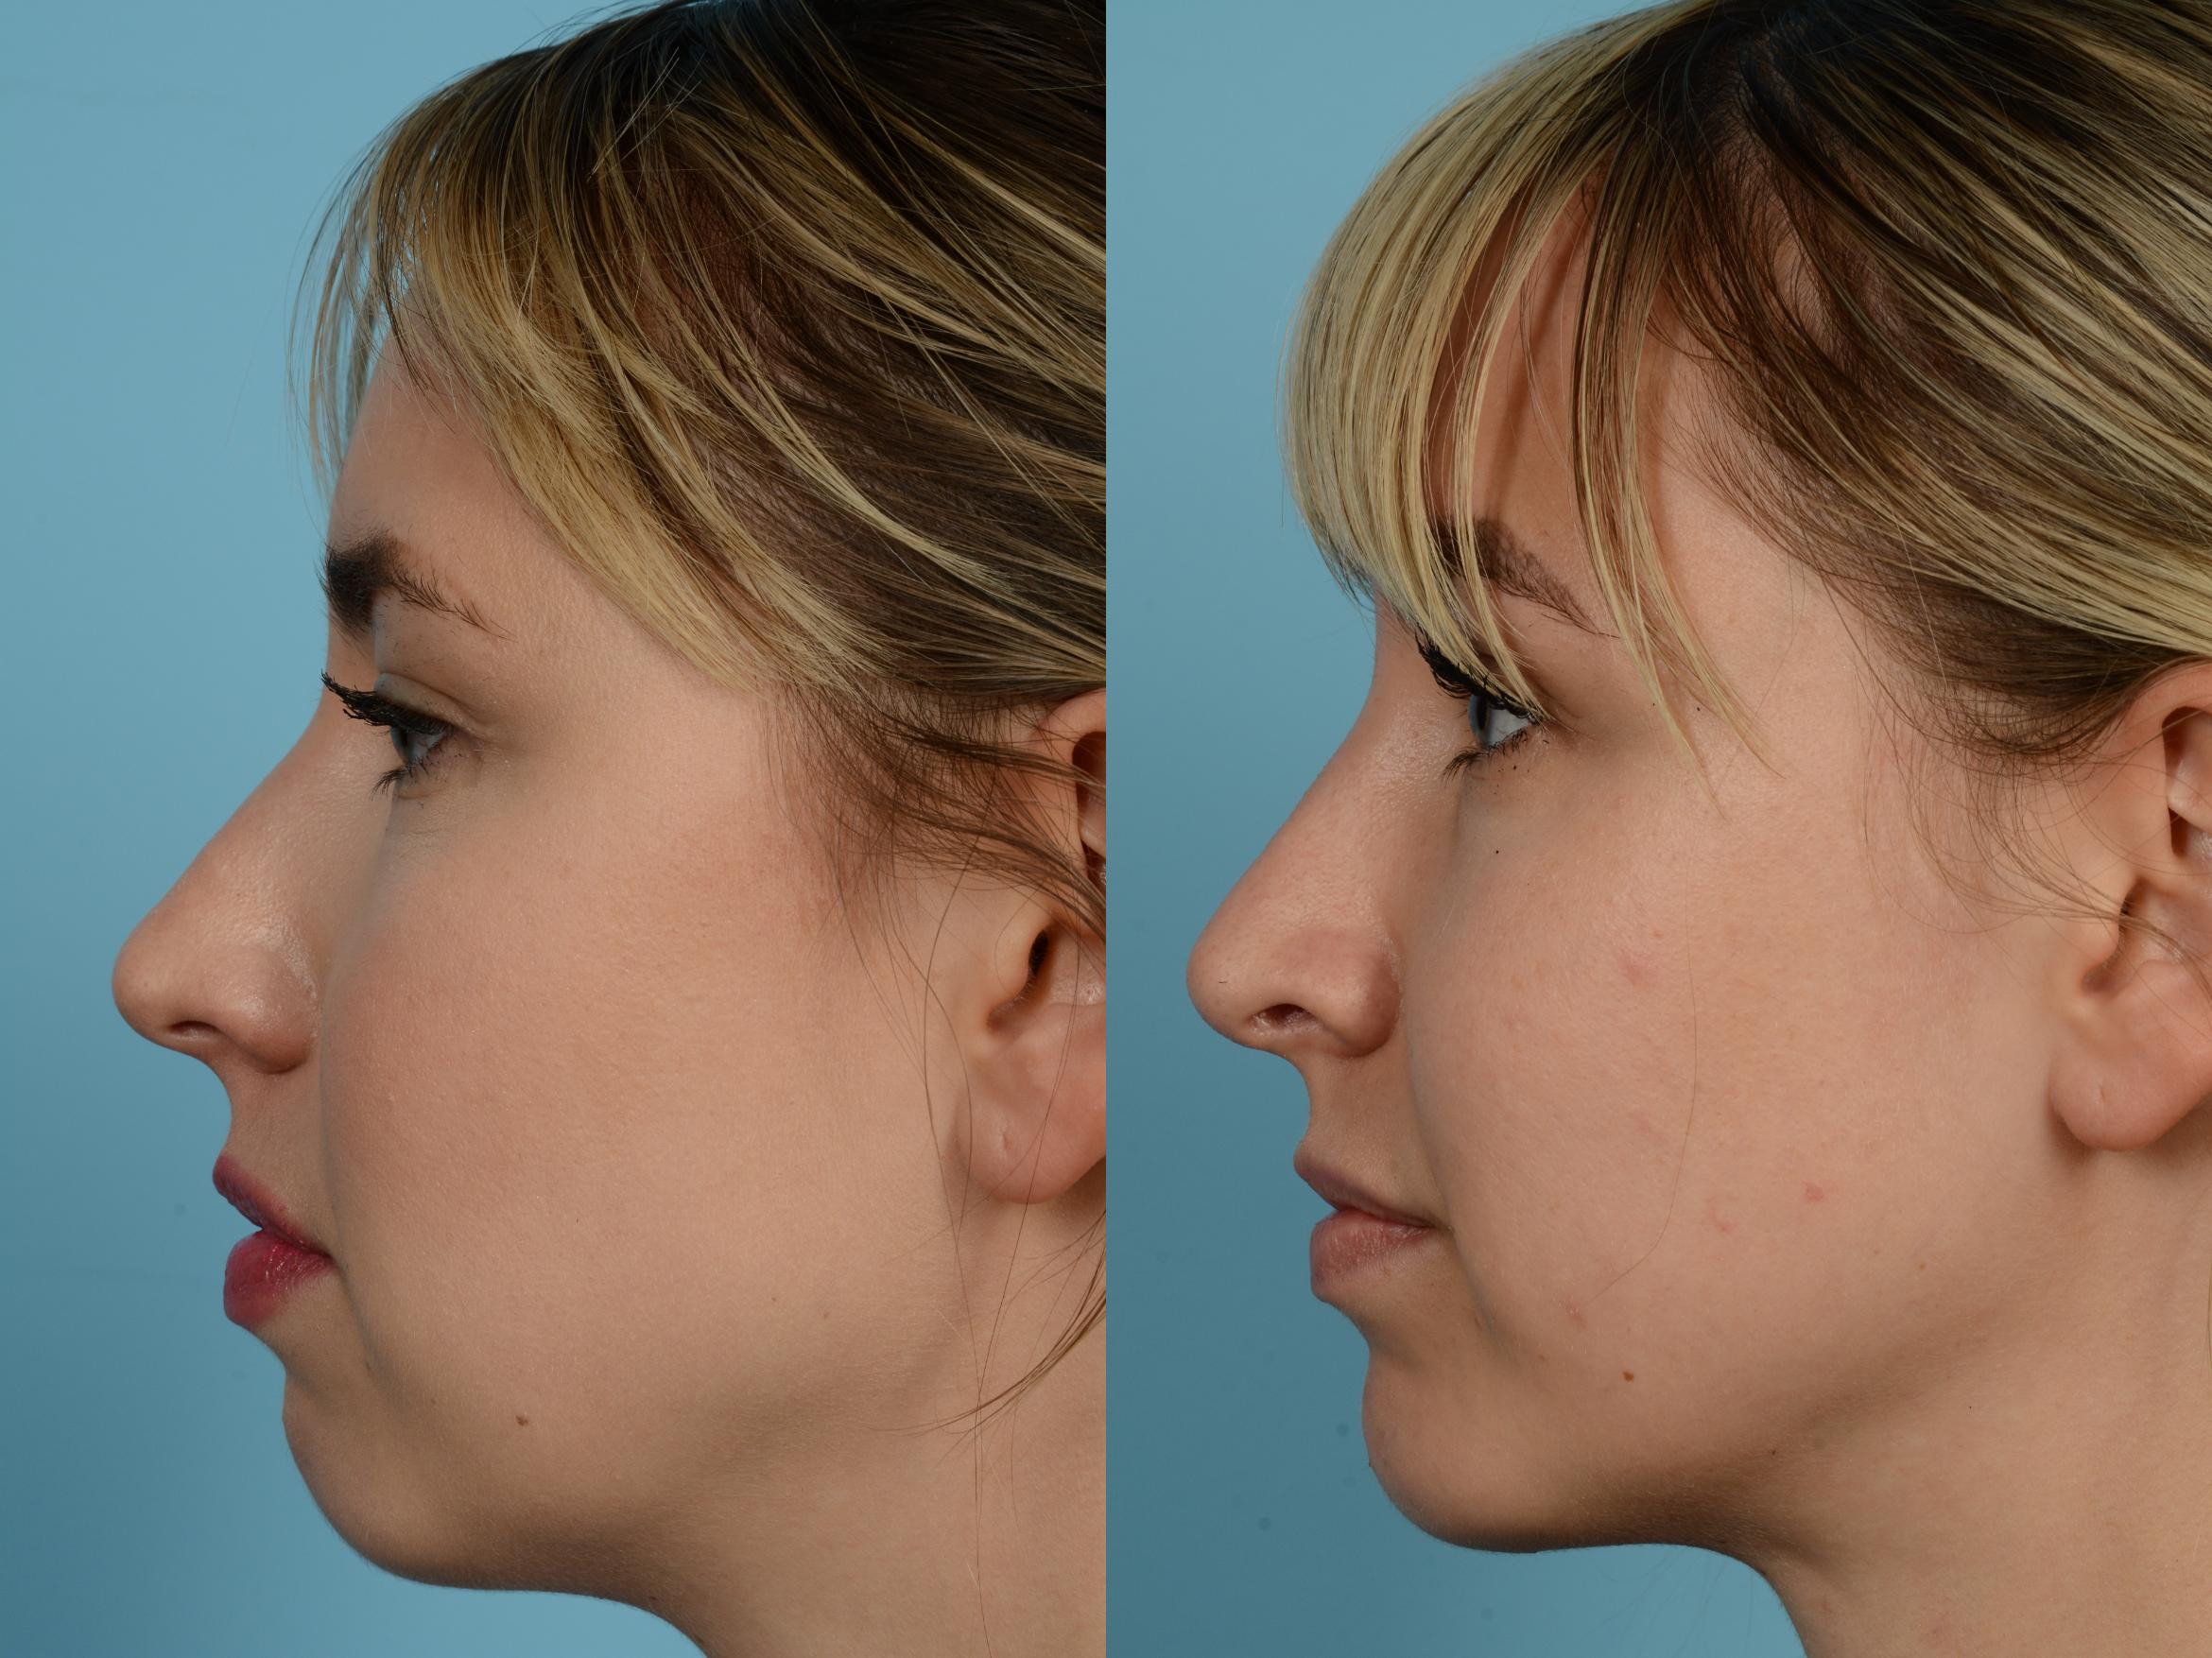 Dr. Mustoe in Chicago performed Rhinoplasty surgery on this female patient 25-30 years old.